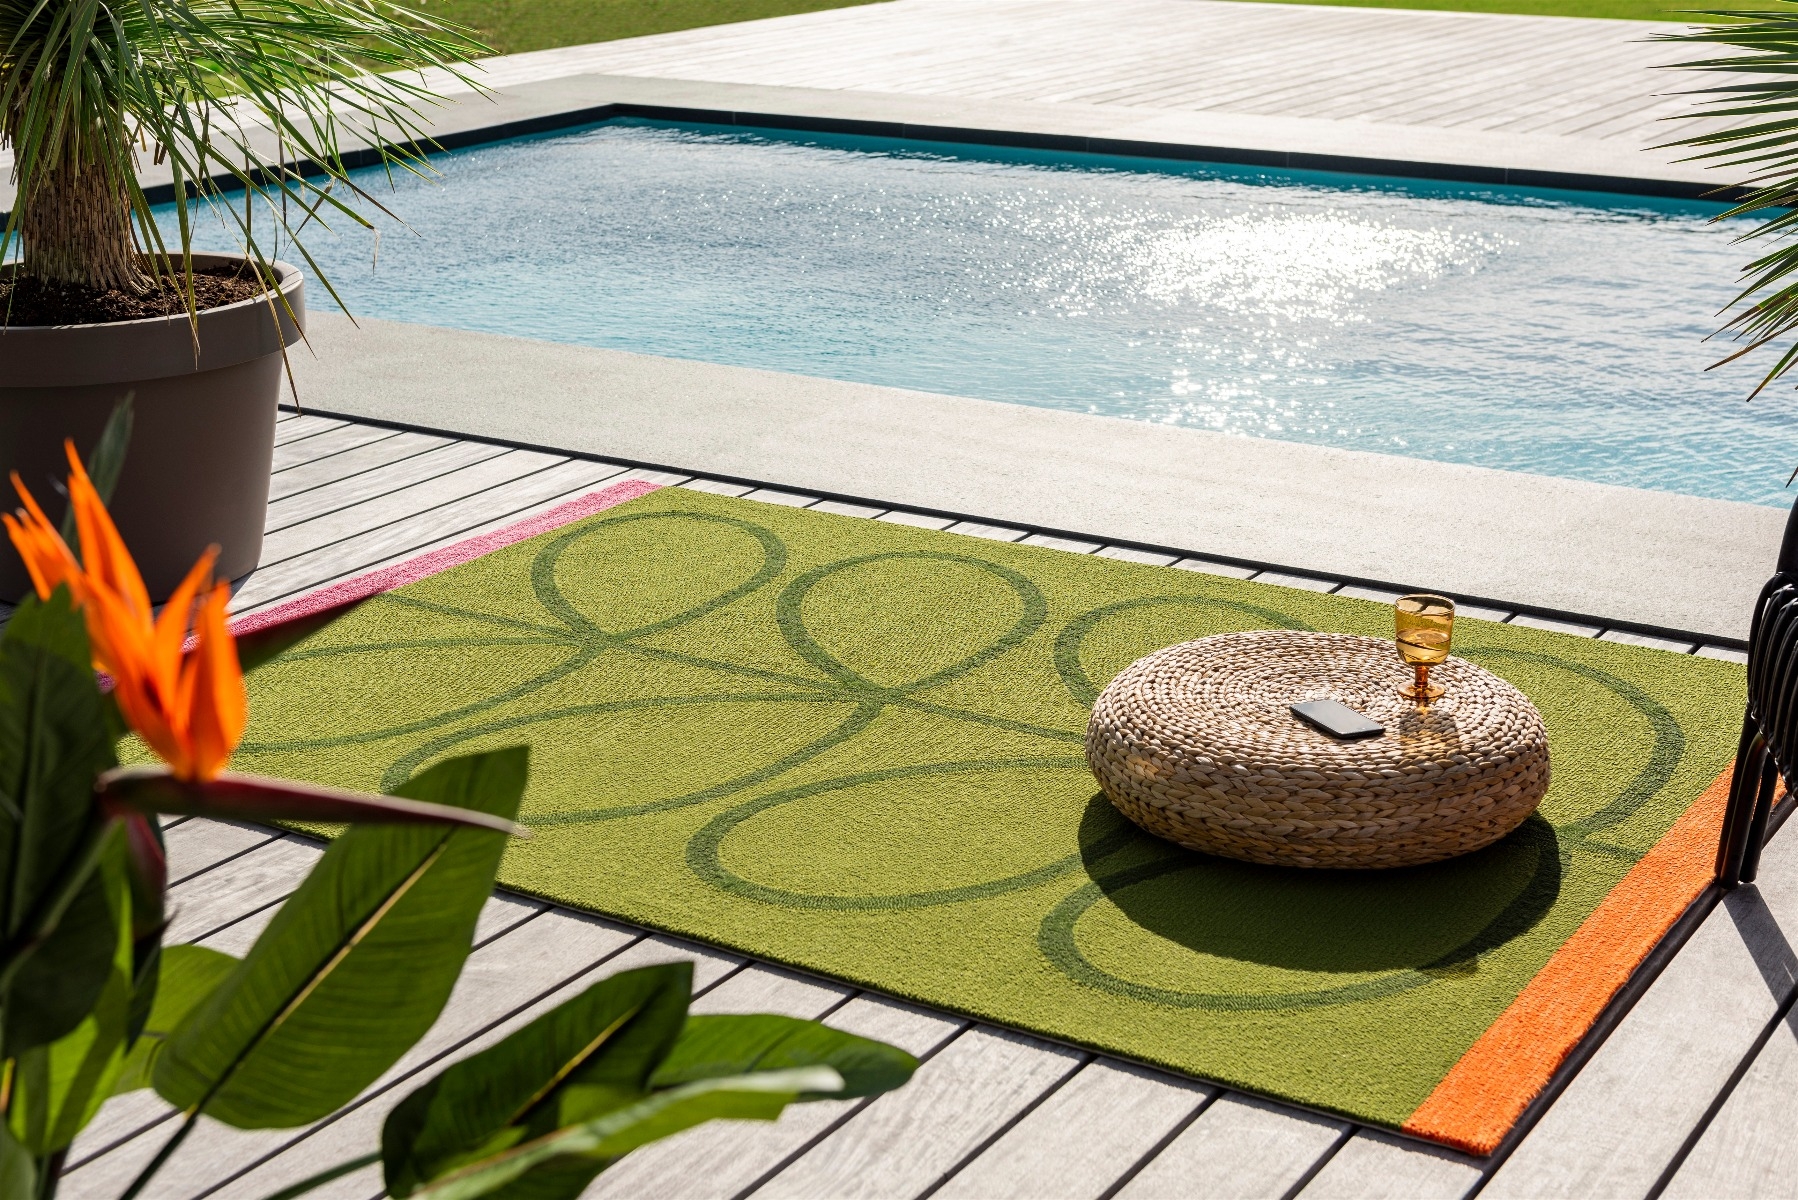 Giant Linear St Seagrass Outdoor 460607 Rug ☞ Size: 160 x 230 cm